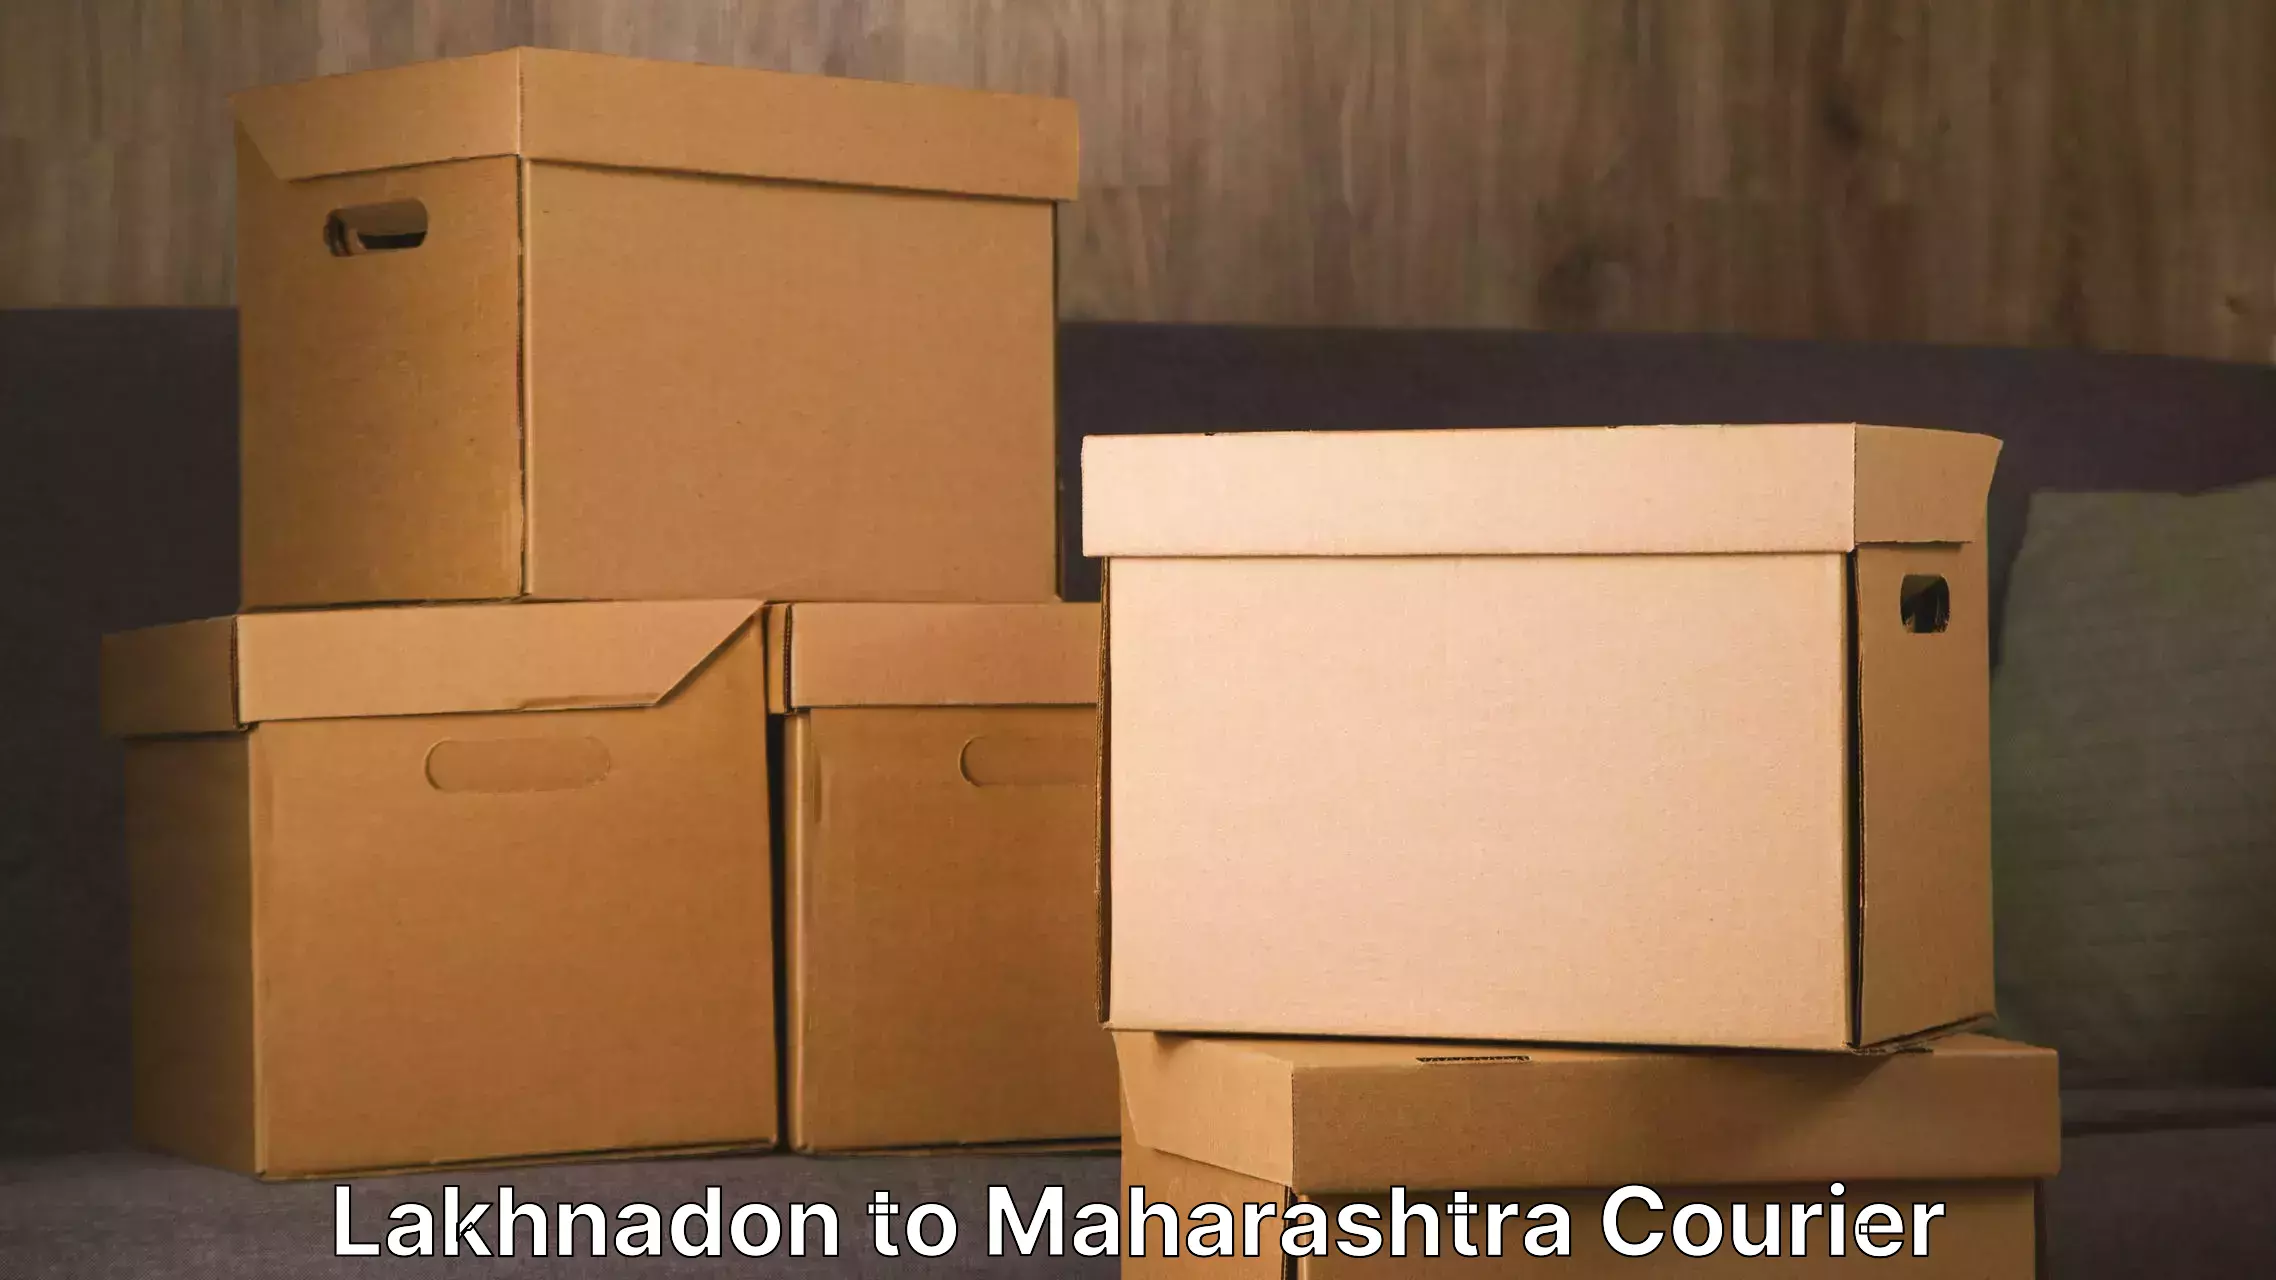 Moving and storage services in Lakhnadon to Pimpalgaon